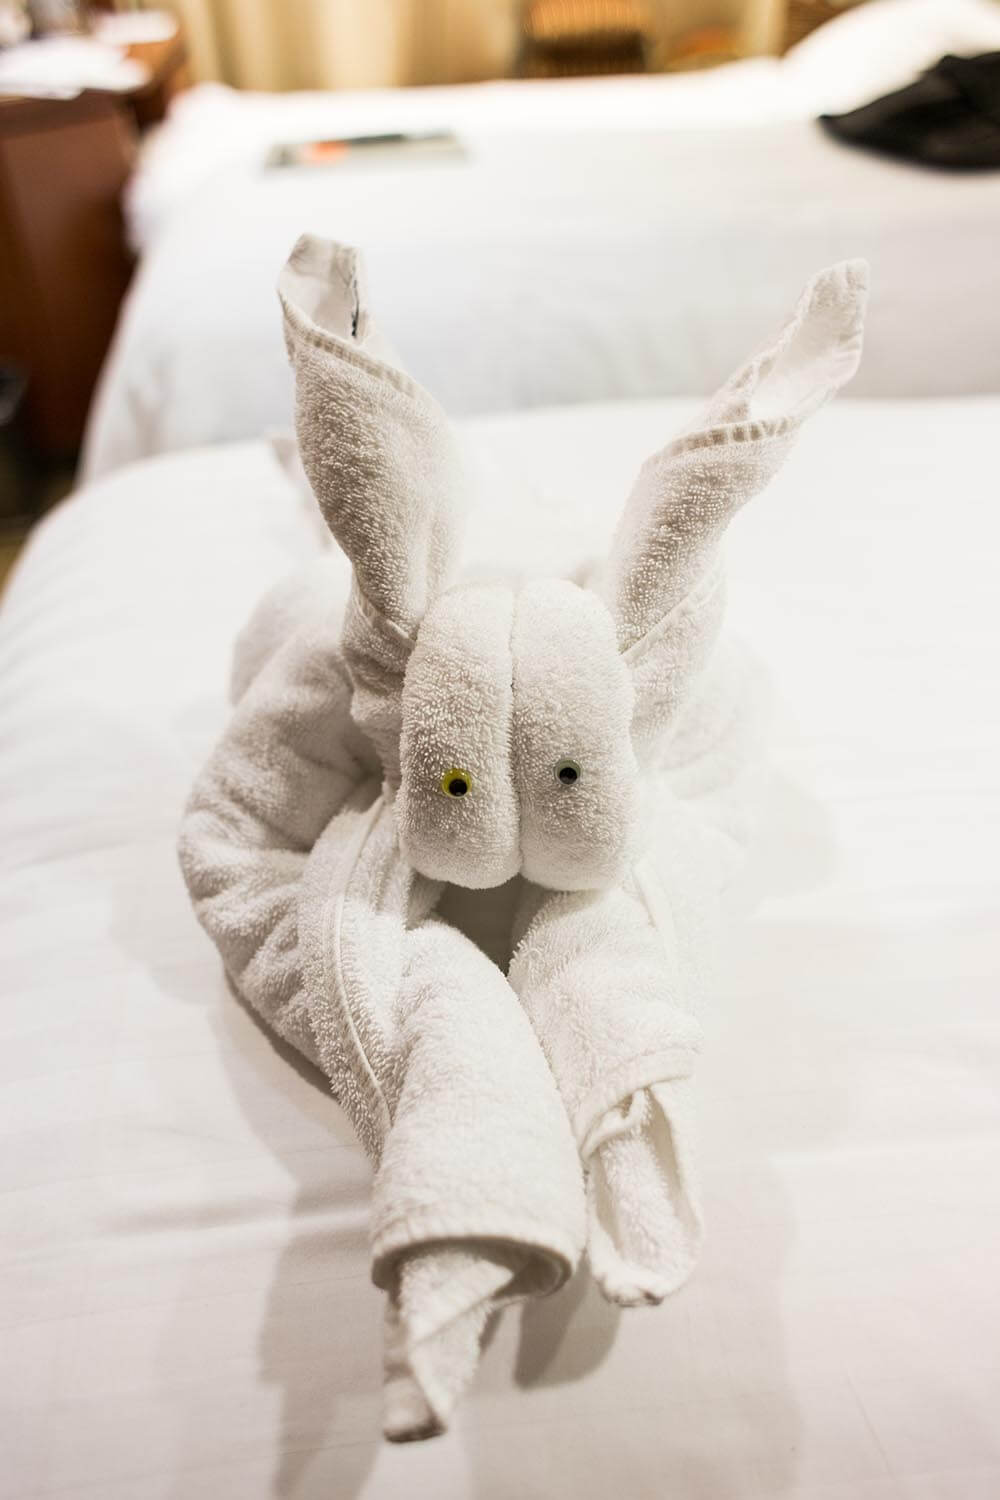 Our daughter loved discovering towel creatures in our cabin each night. Nyoman and Rizal, our room stewards, were excellent.